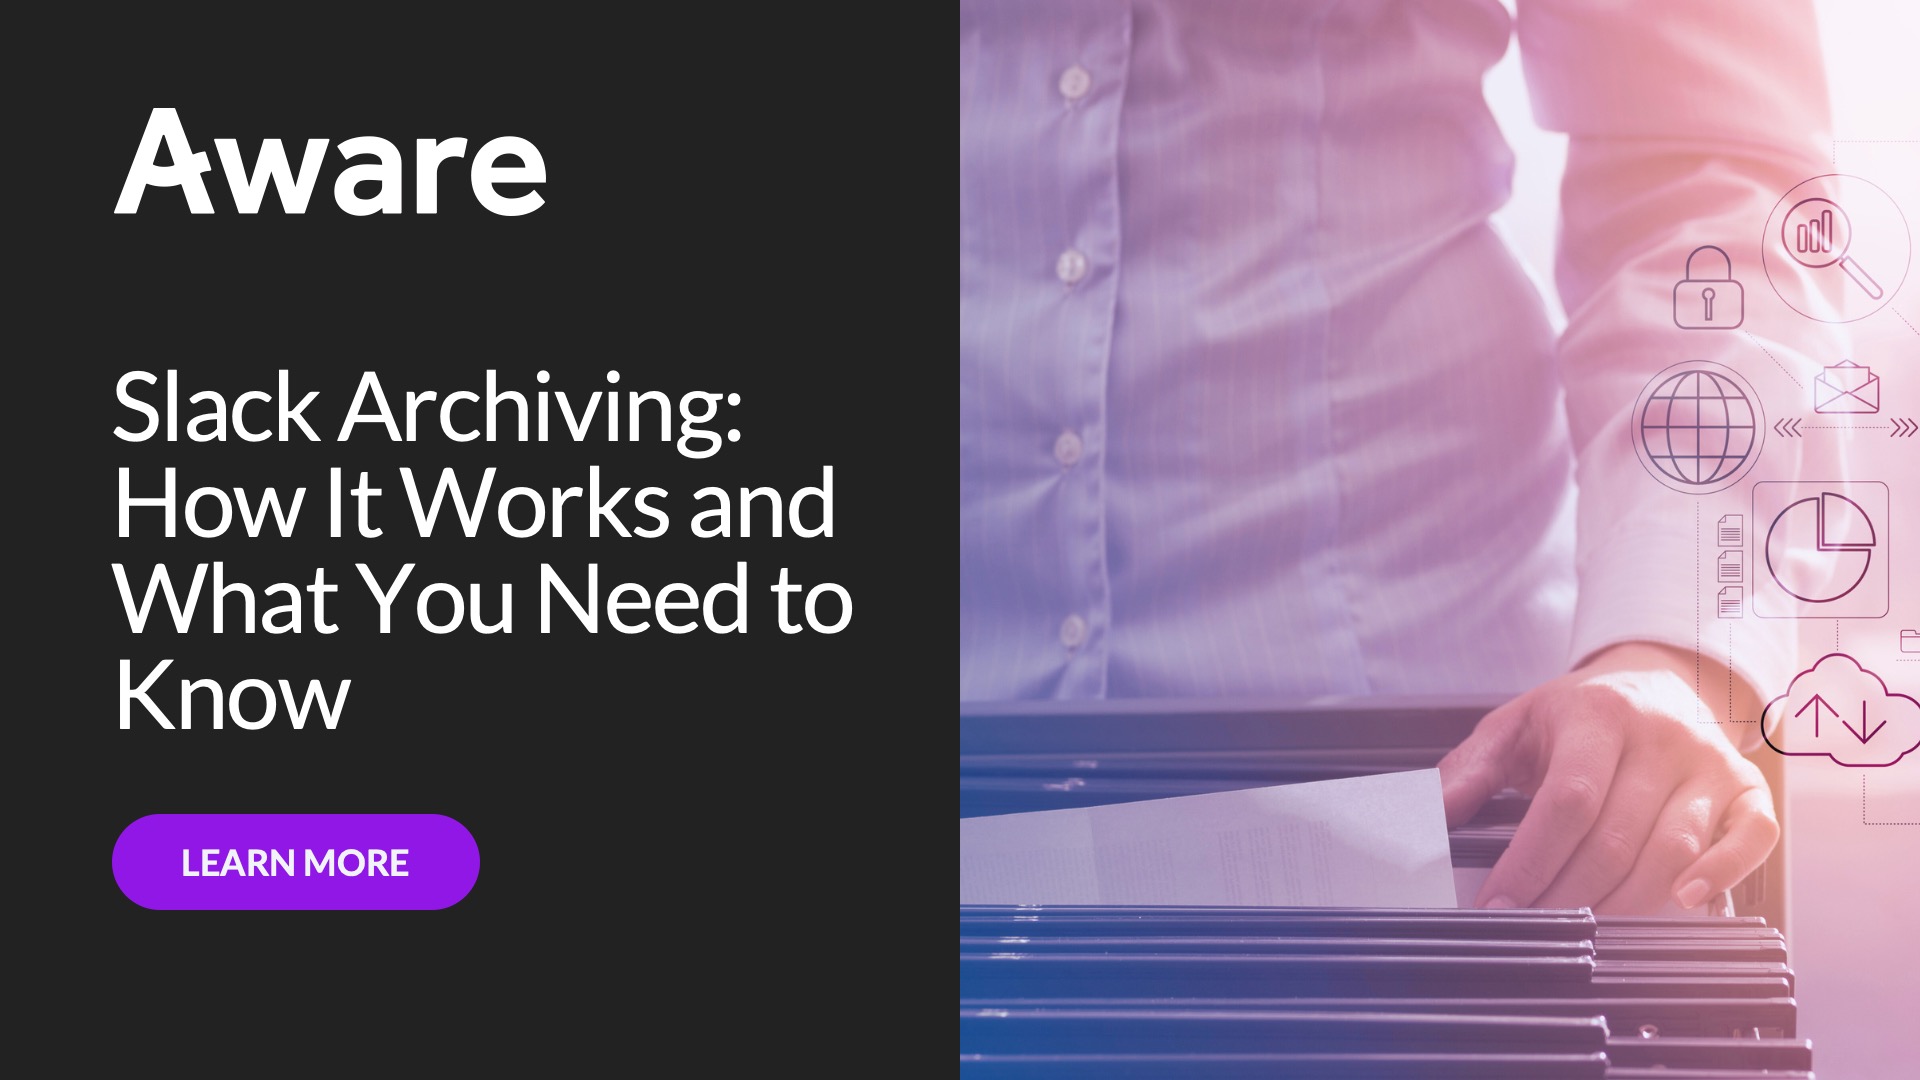 Slack Archiving: How It Works and What You Need to Know